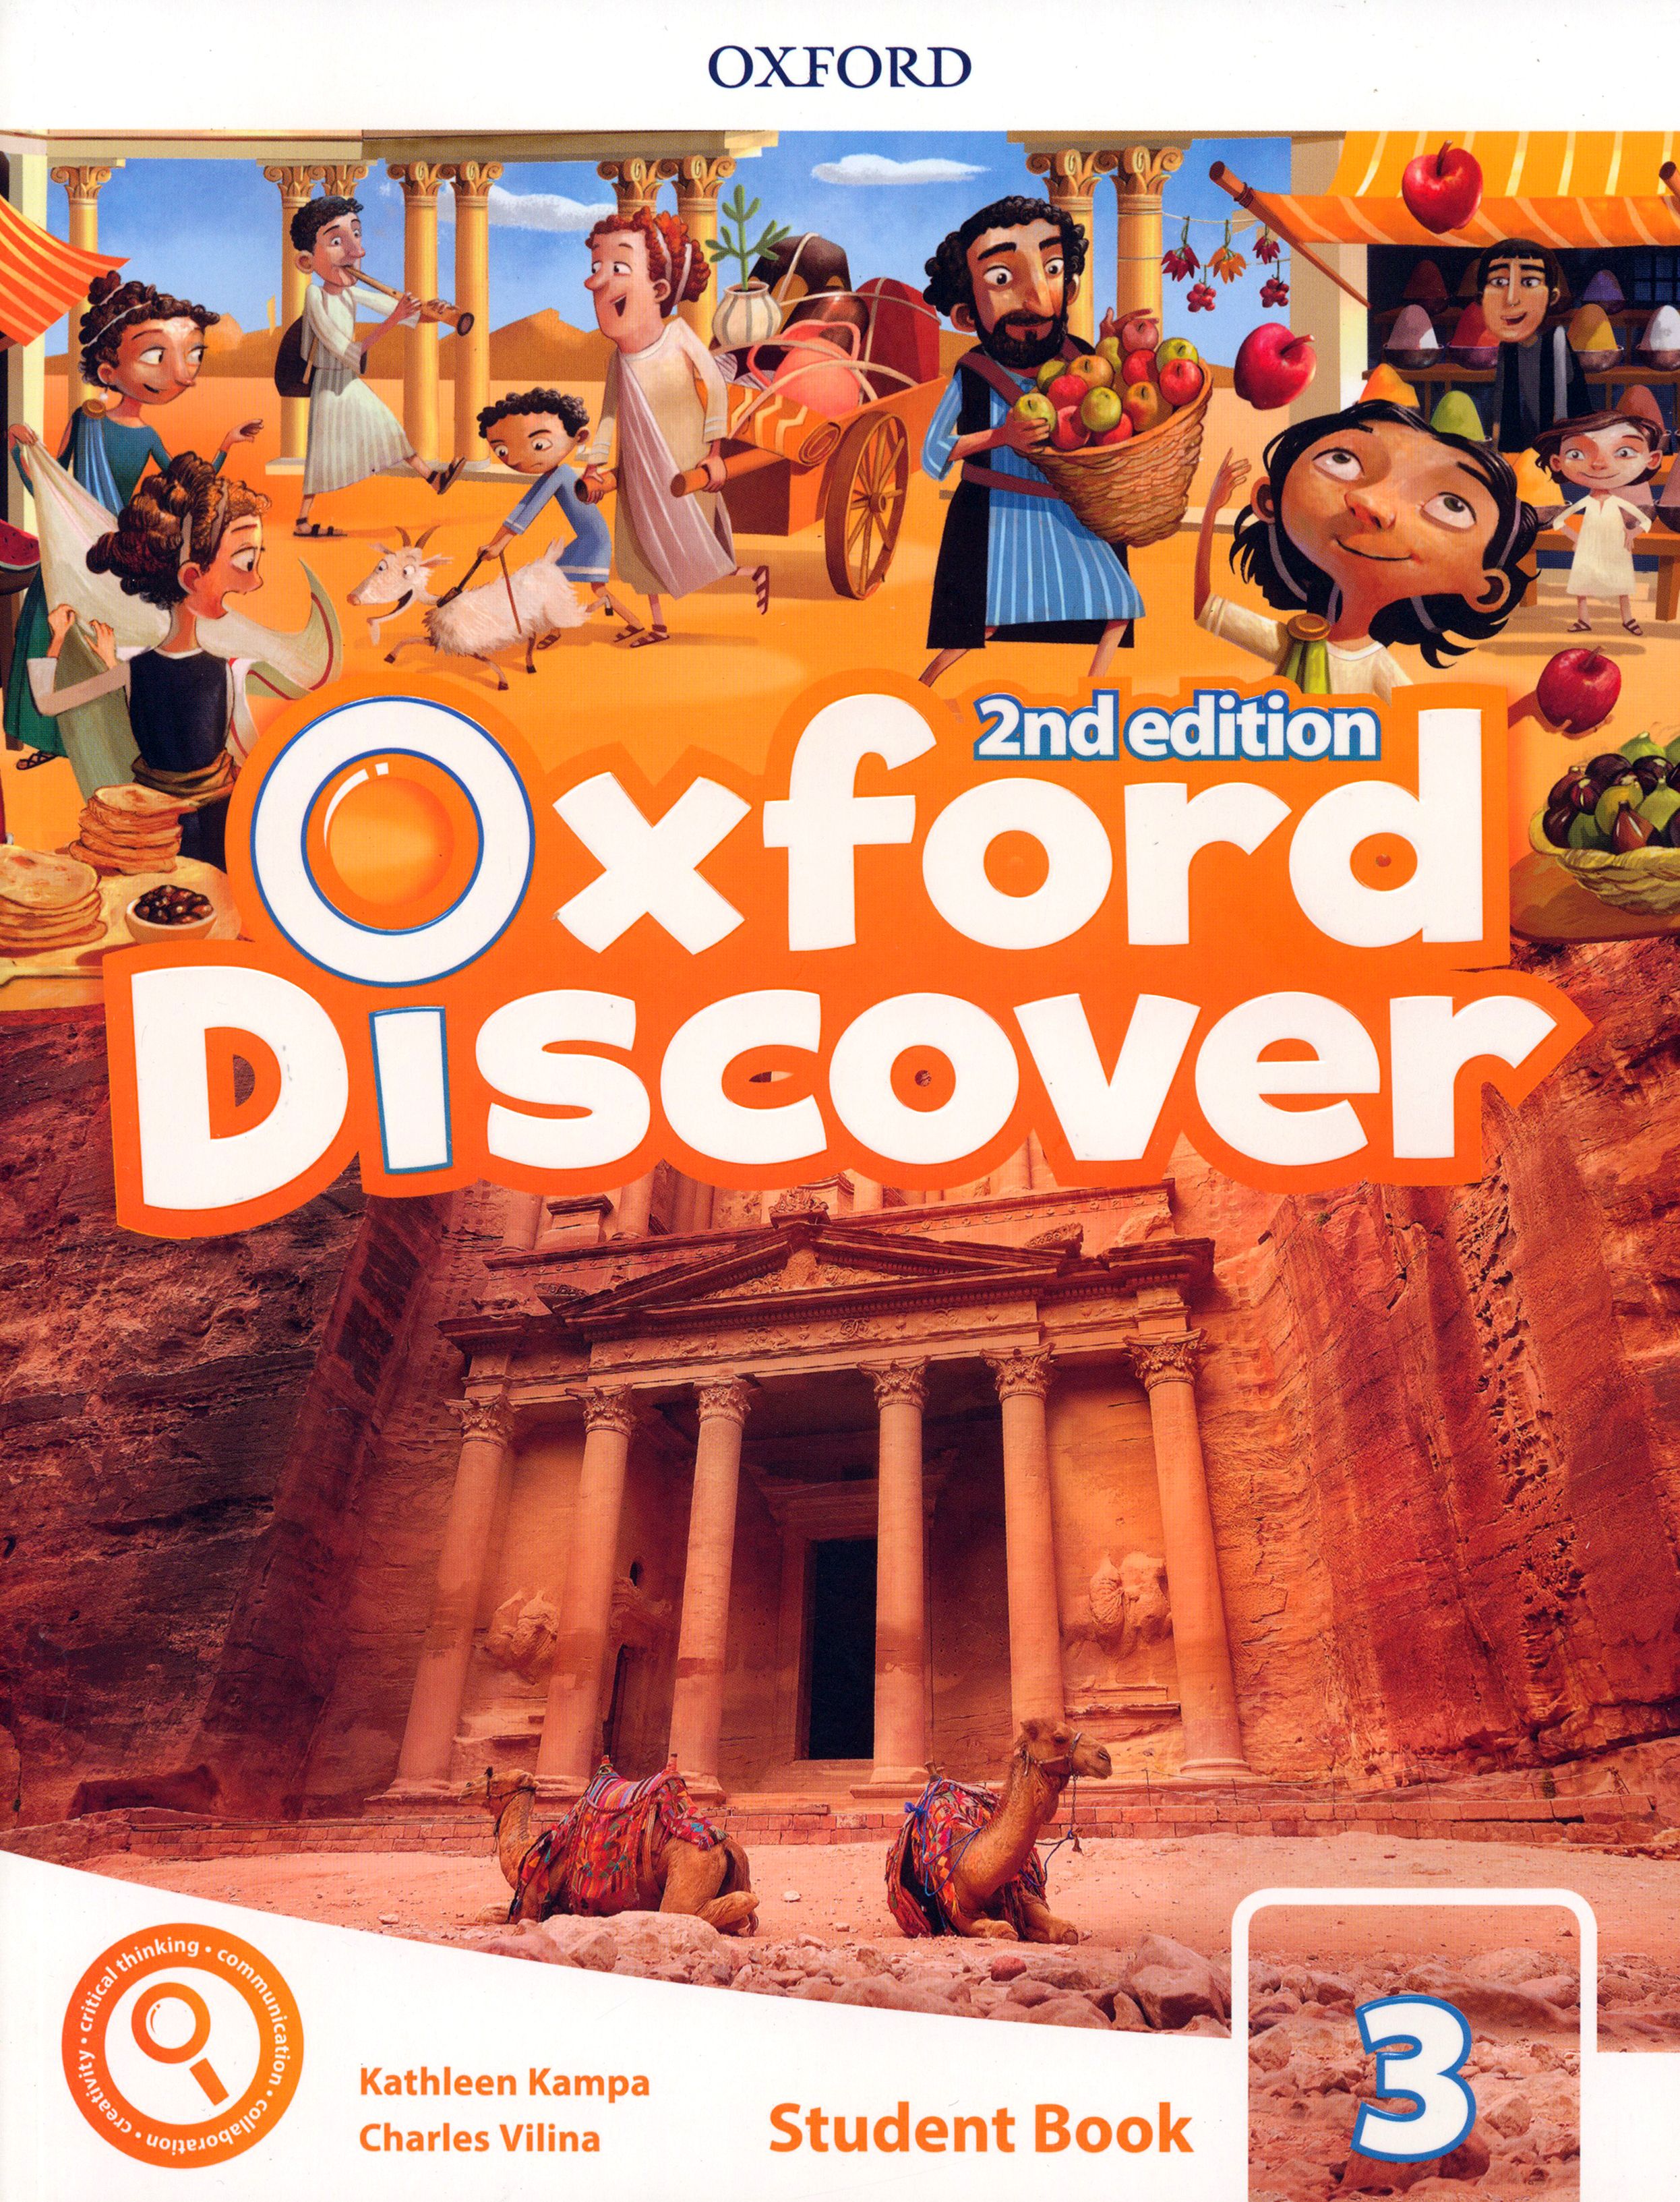 Oxford discover book. Oxford discover (2nd Edition) 3 student's book. Oxford discover 1 student's book 2nd Edition. Oxford discover 1 student book 2nd Edition Audio. Oxford discover 1 (student’s book, Workbook).